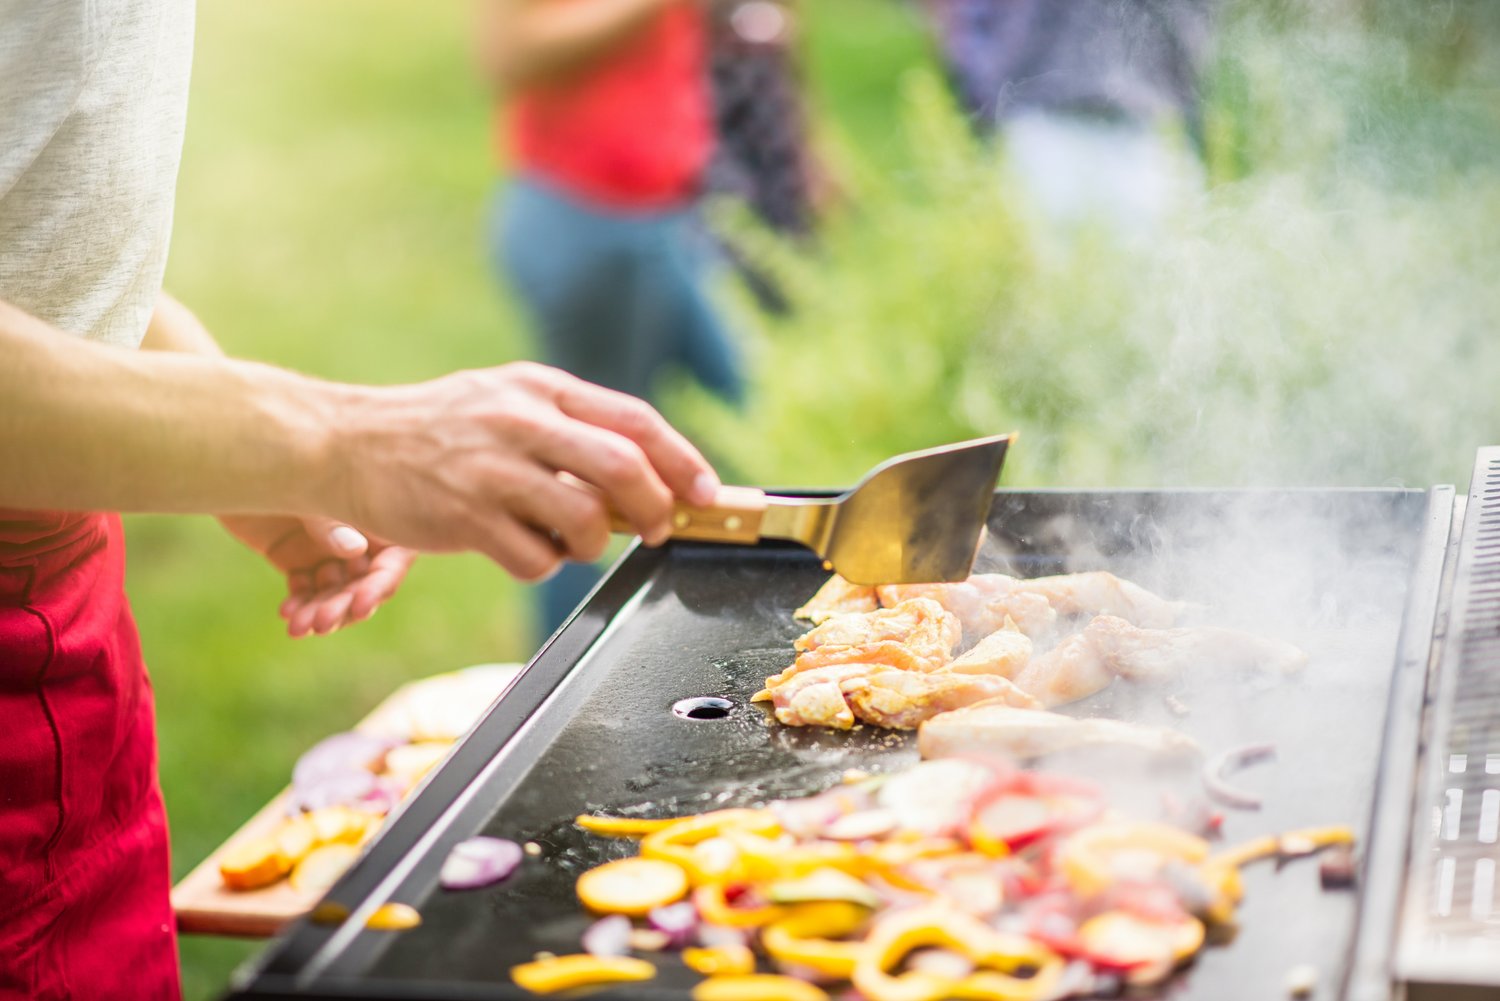 Camp Chef vs Blackstone: Outdoor Cooking Options Compared